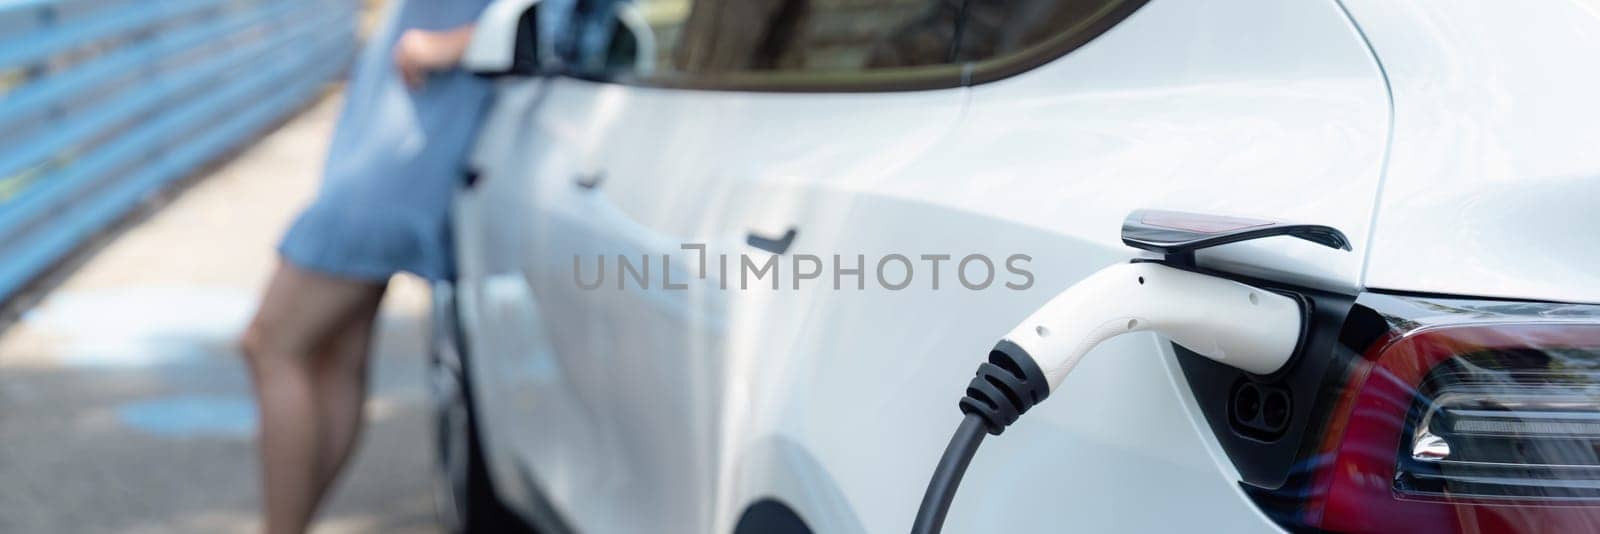 Electric vehicle recharging battery from home EV charging station. Perpetual by biancoblue